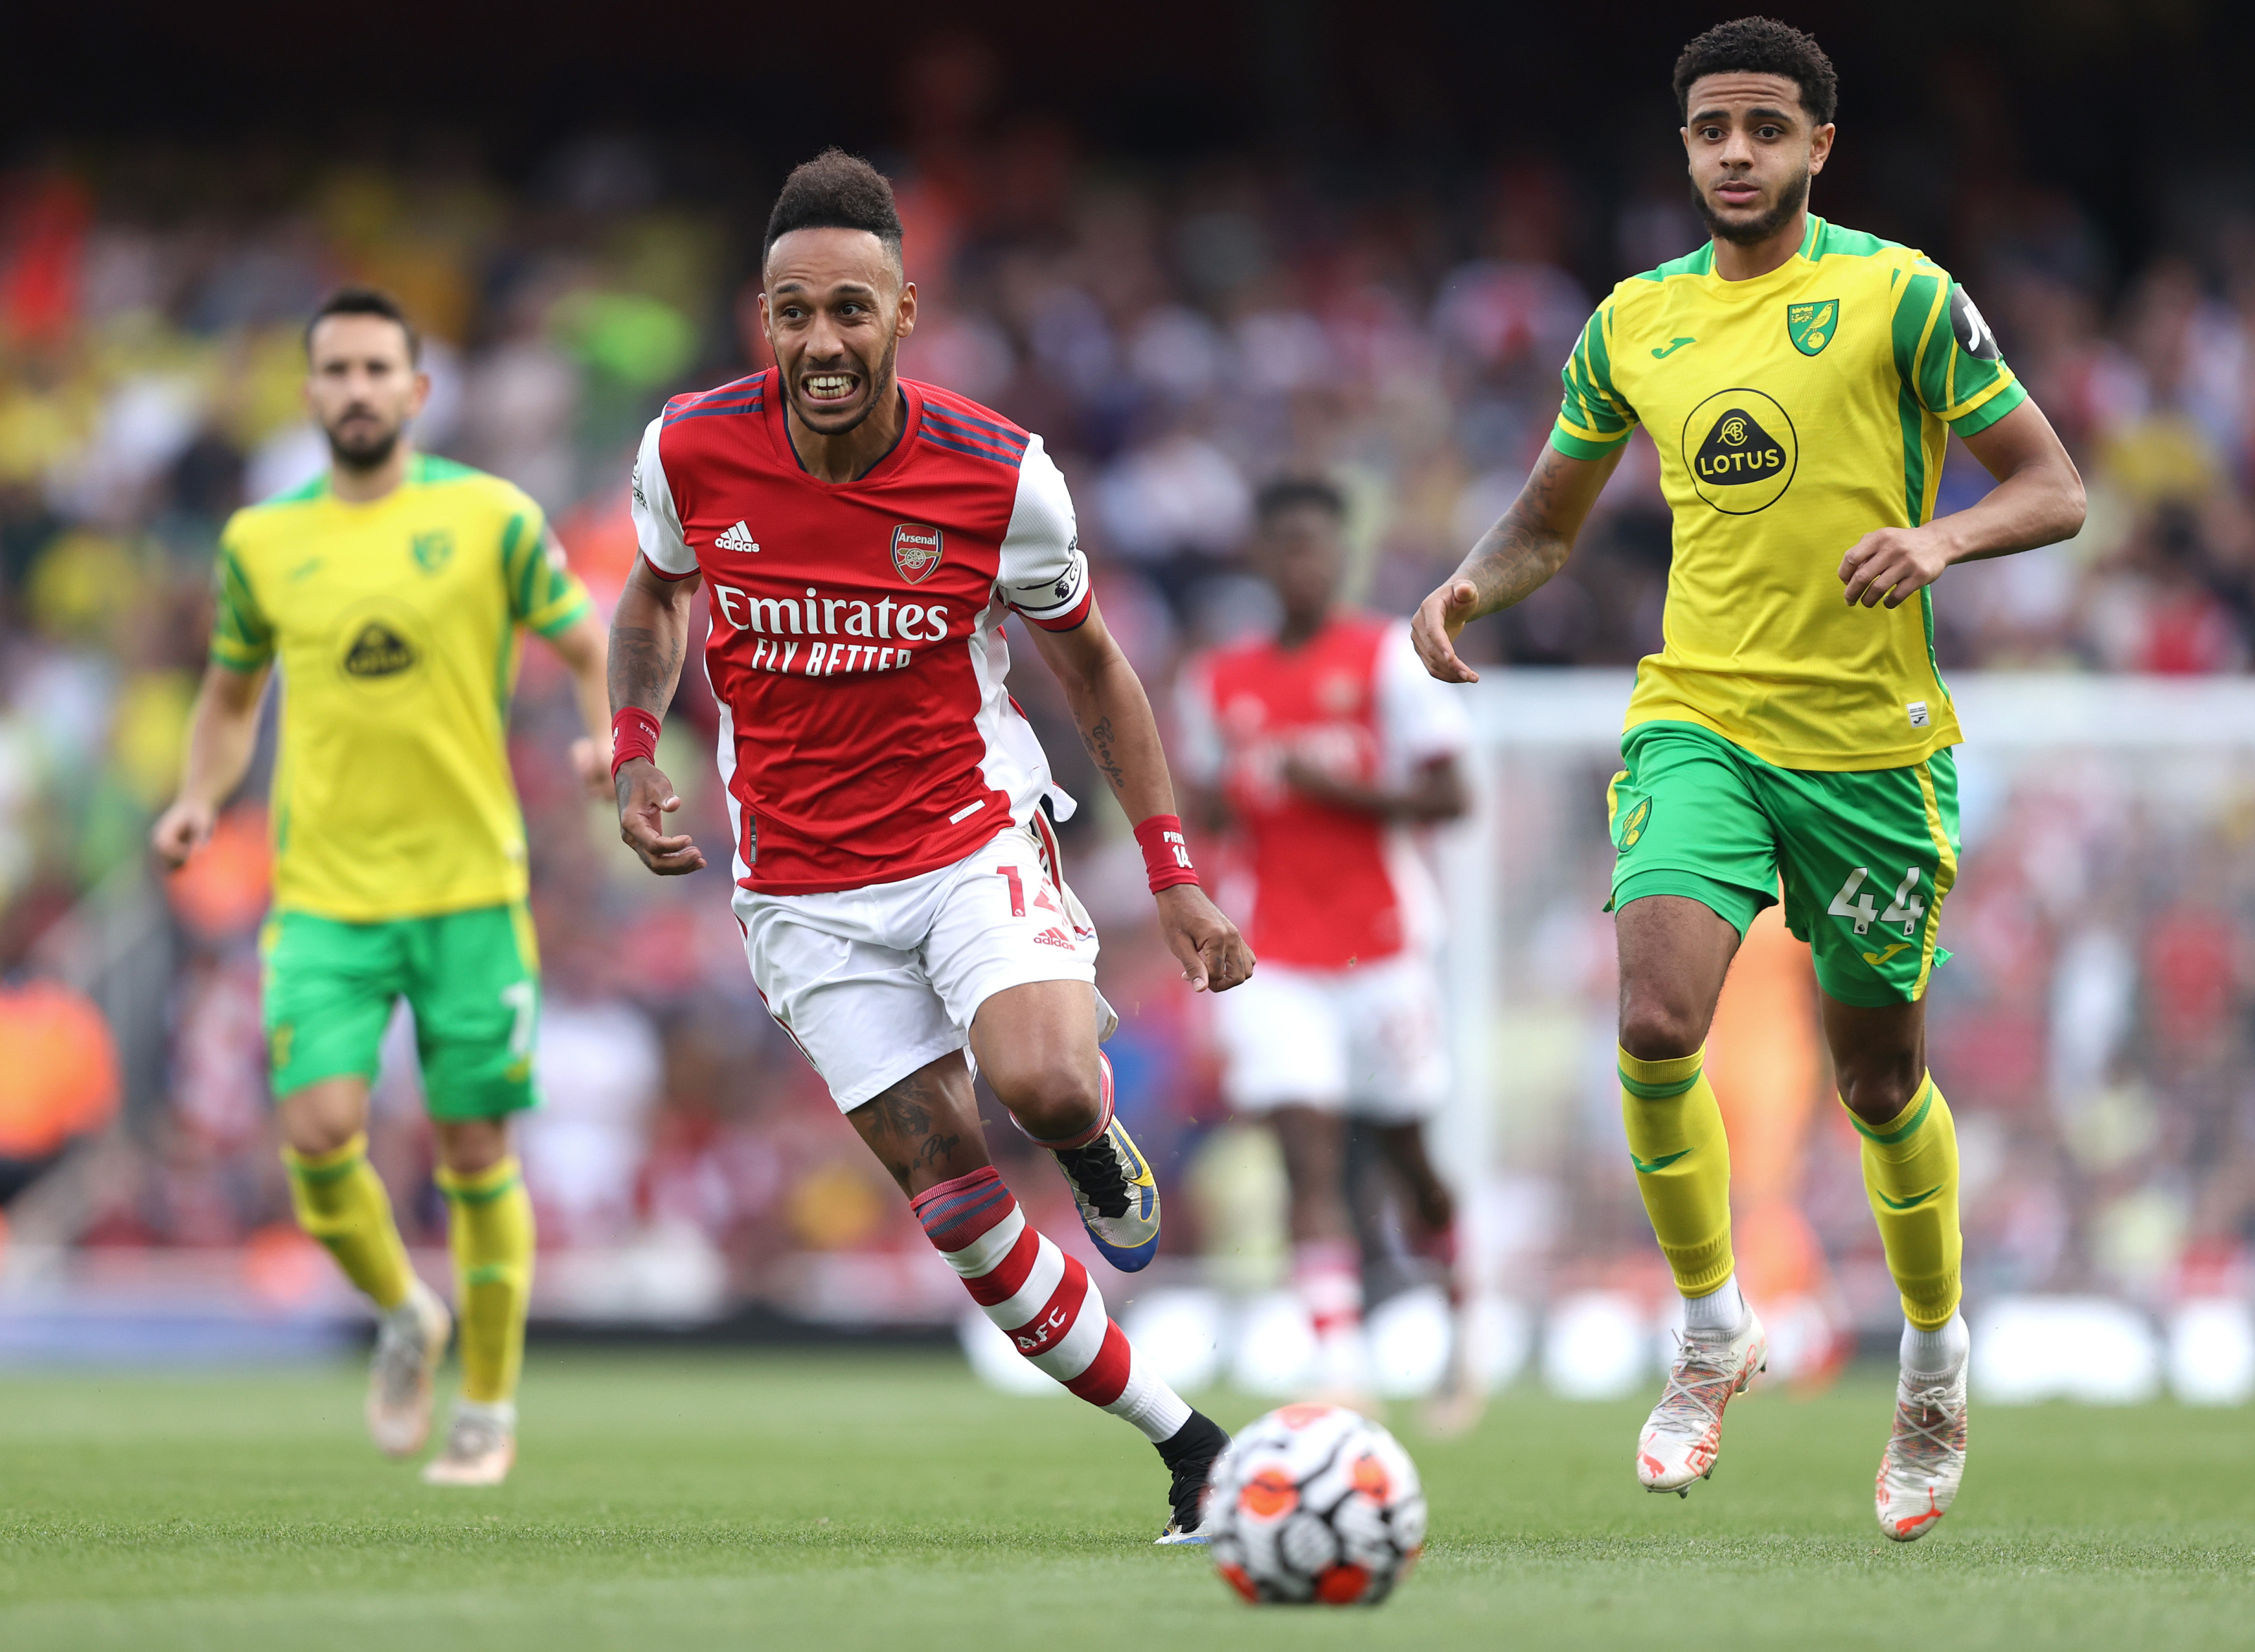 Norwich v Arsenal live stream Reddit Watch Premier League on Boxing Day